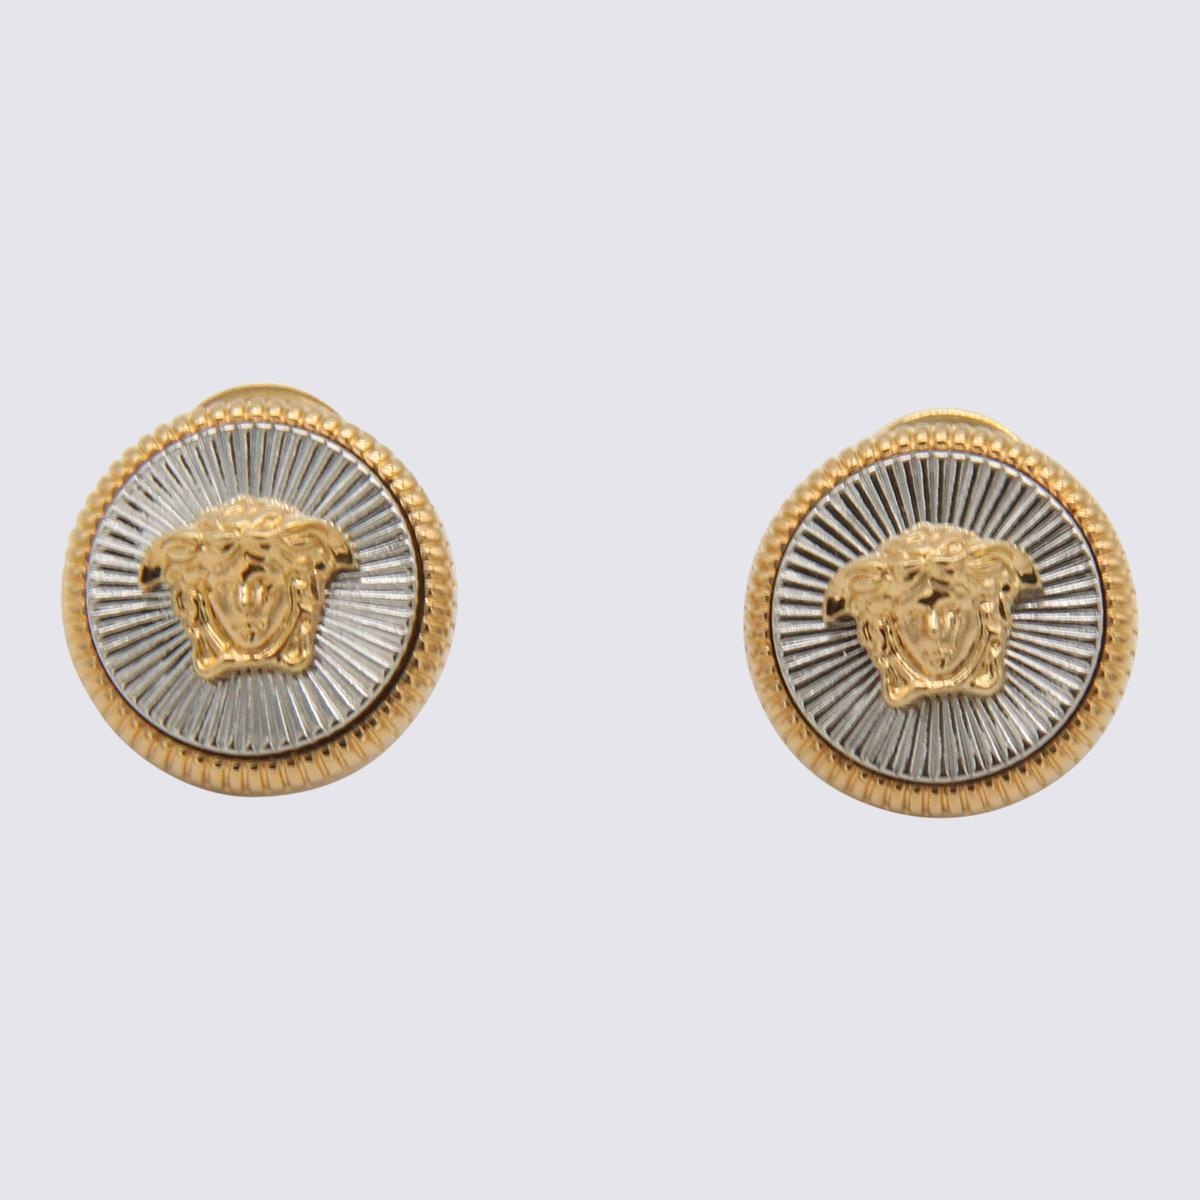 VERSACE GOLD- TONE AND SILVER METAL MEDUSA EARRINGS - 1